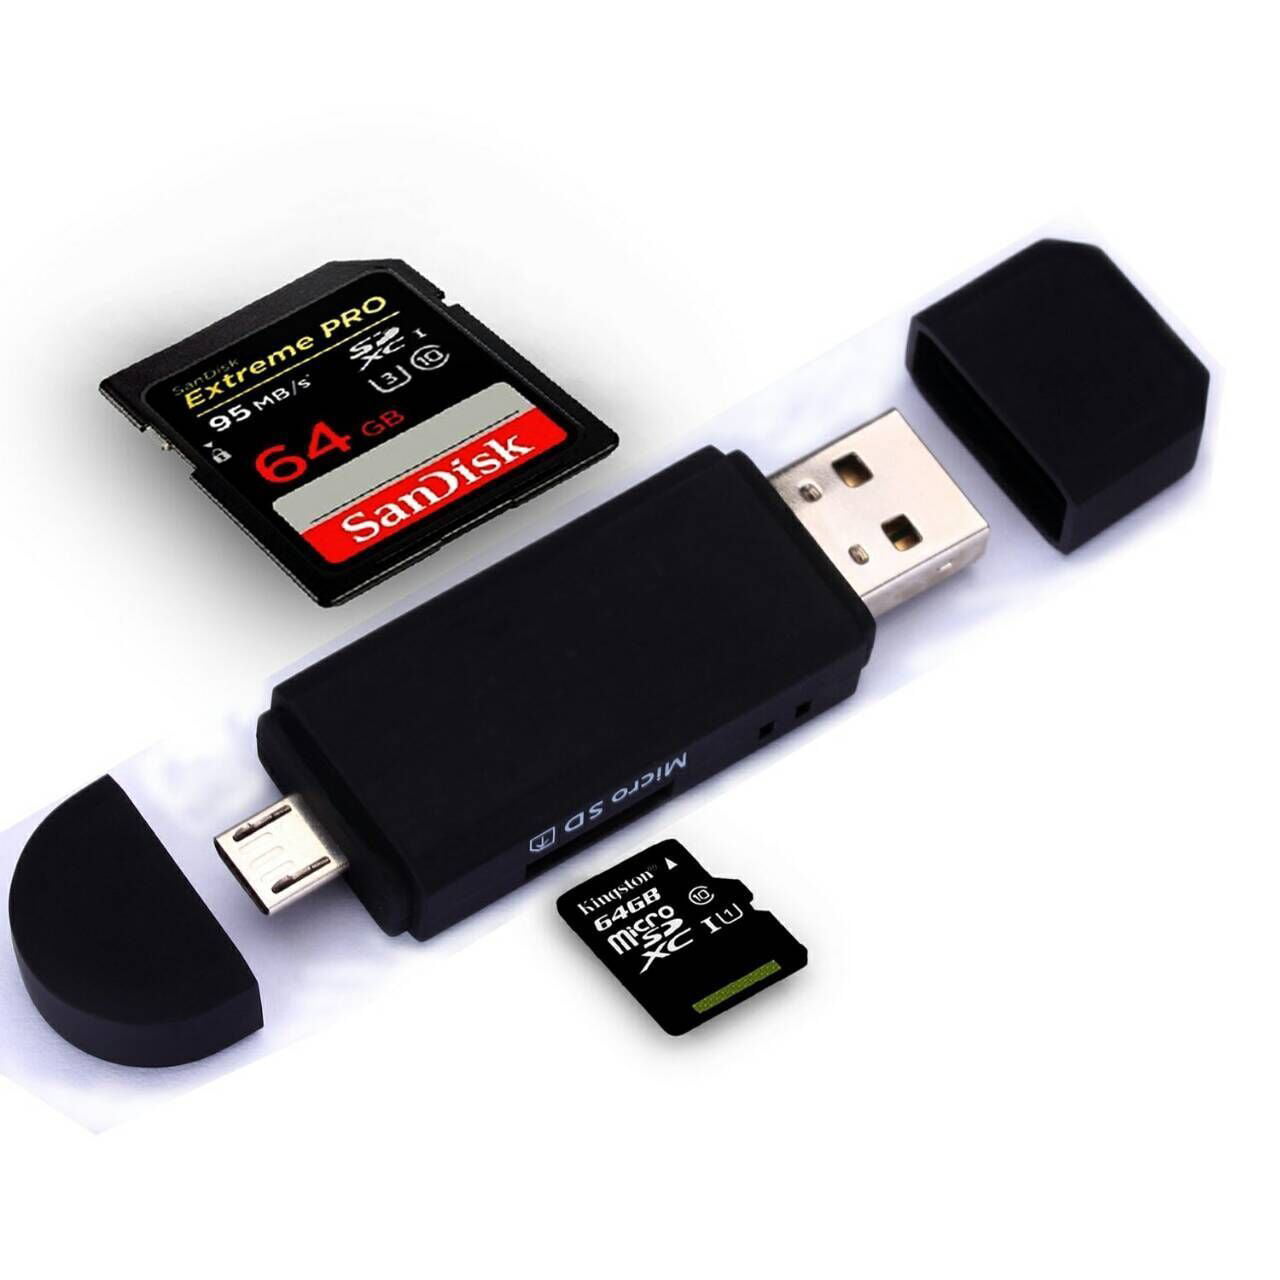 Micro USB OTG to USB 2.0 Adapter SD-/Micro-SD Card Reader with standard USB Male